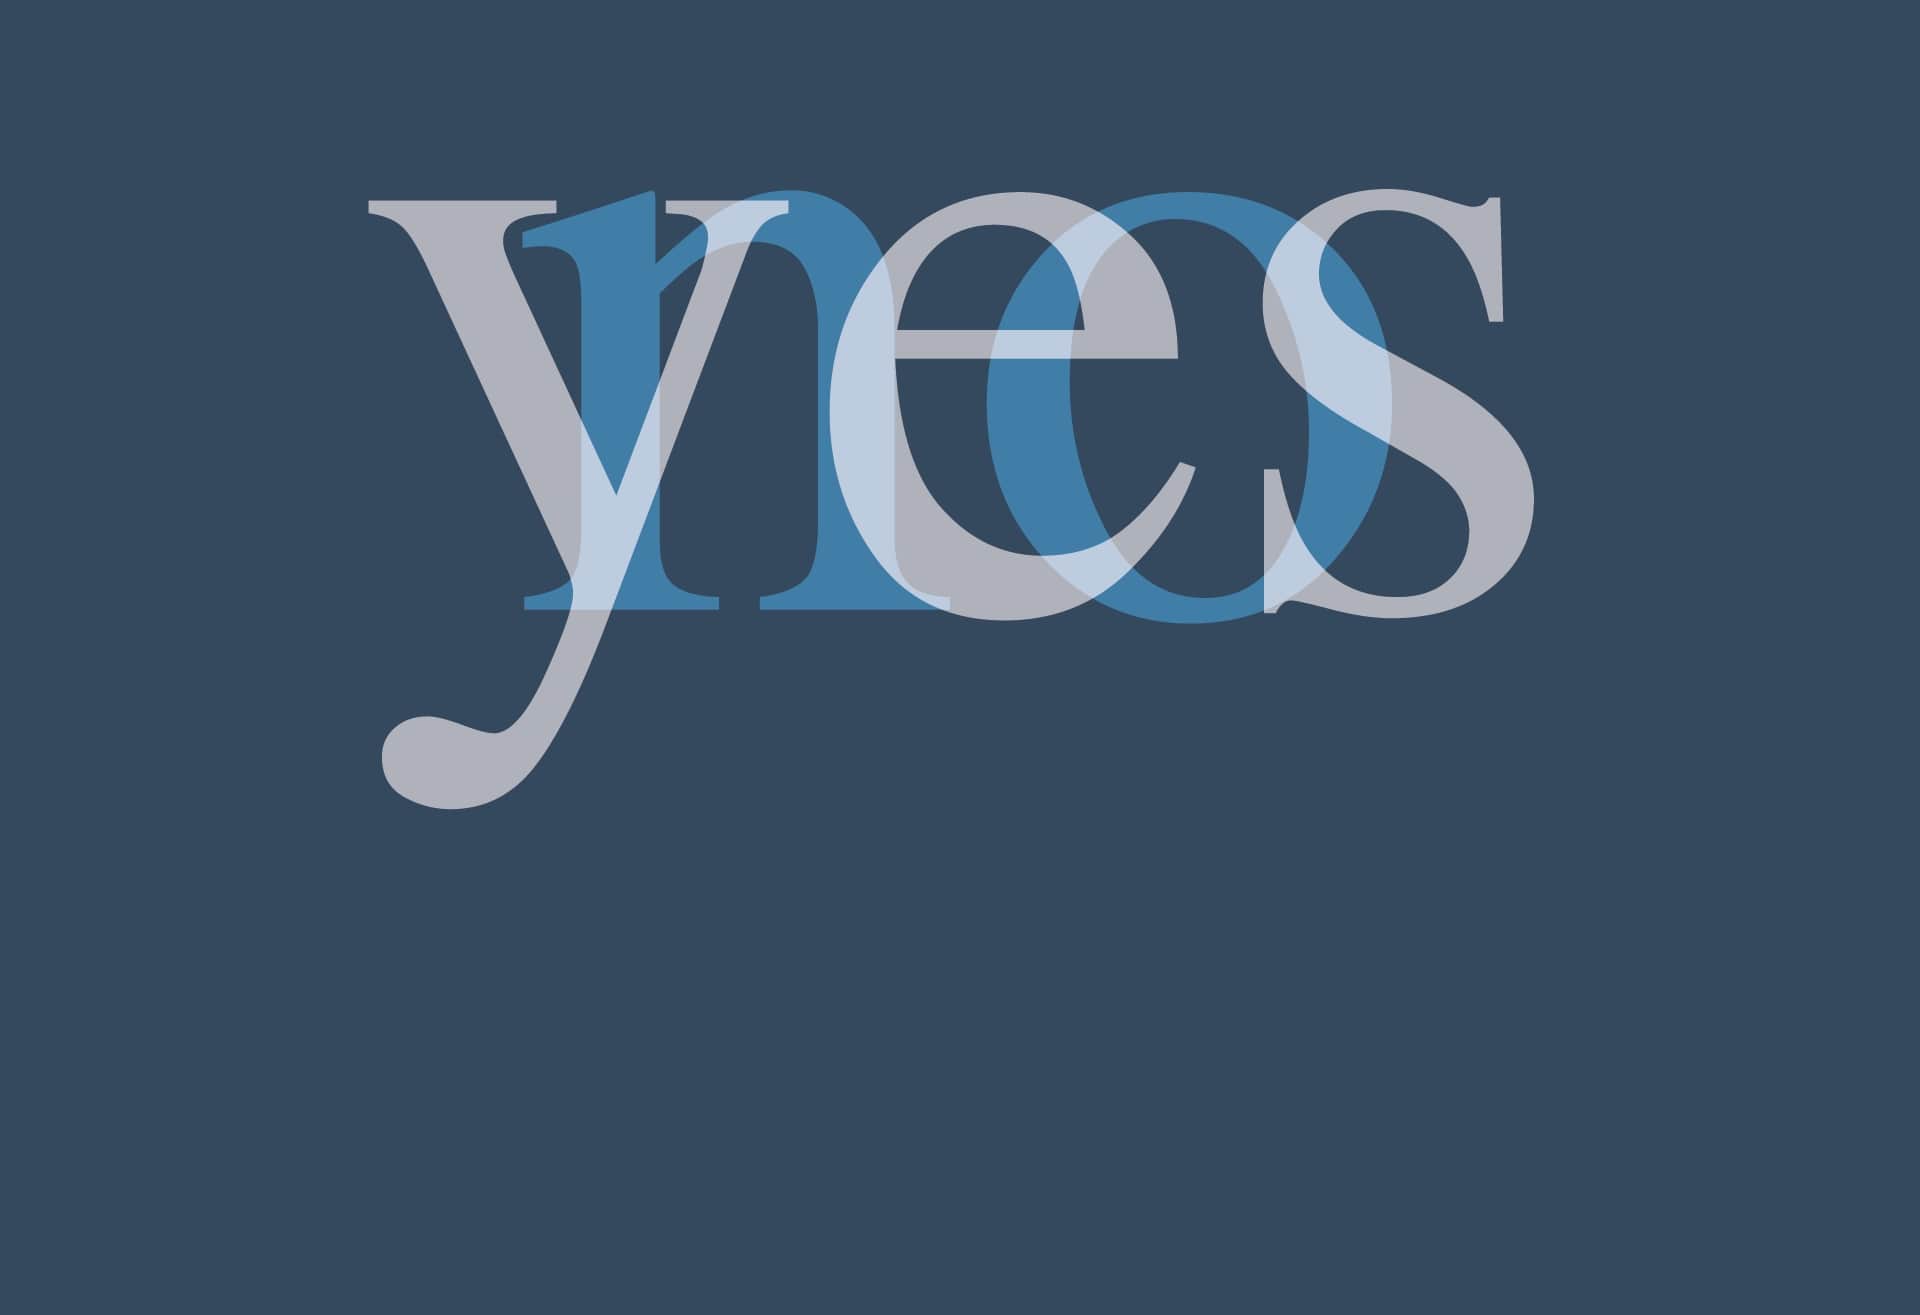 Transforming the word no into yes for CX project approval